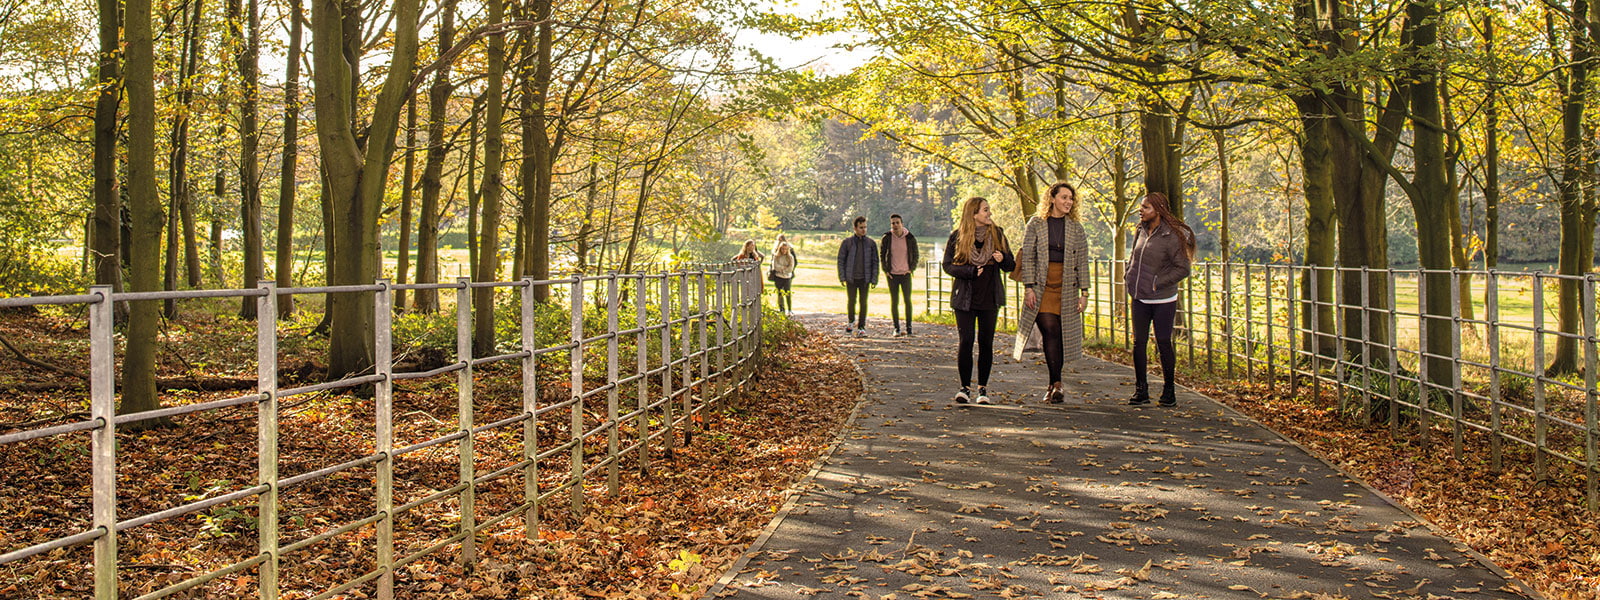 Students walking up a woodland path on a sunny day